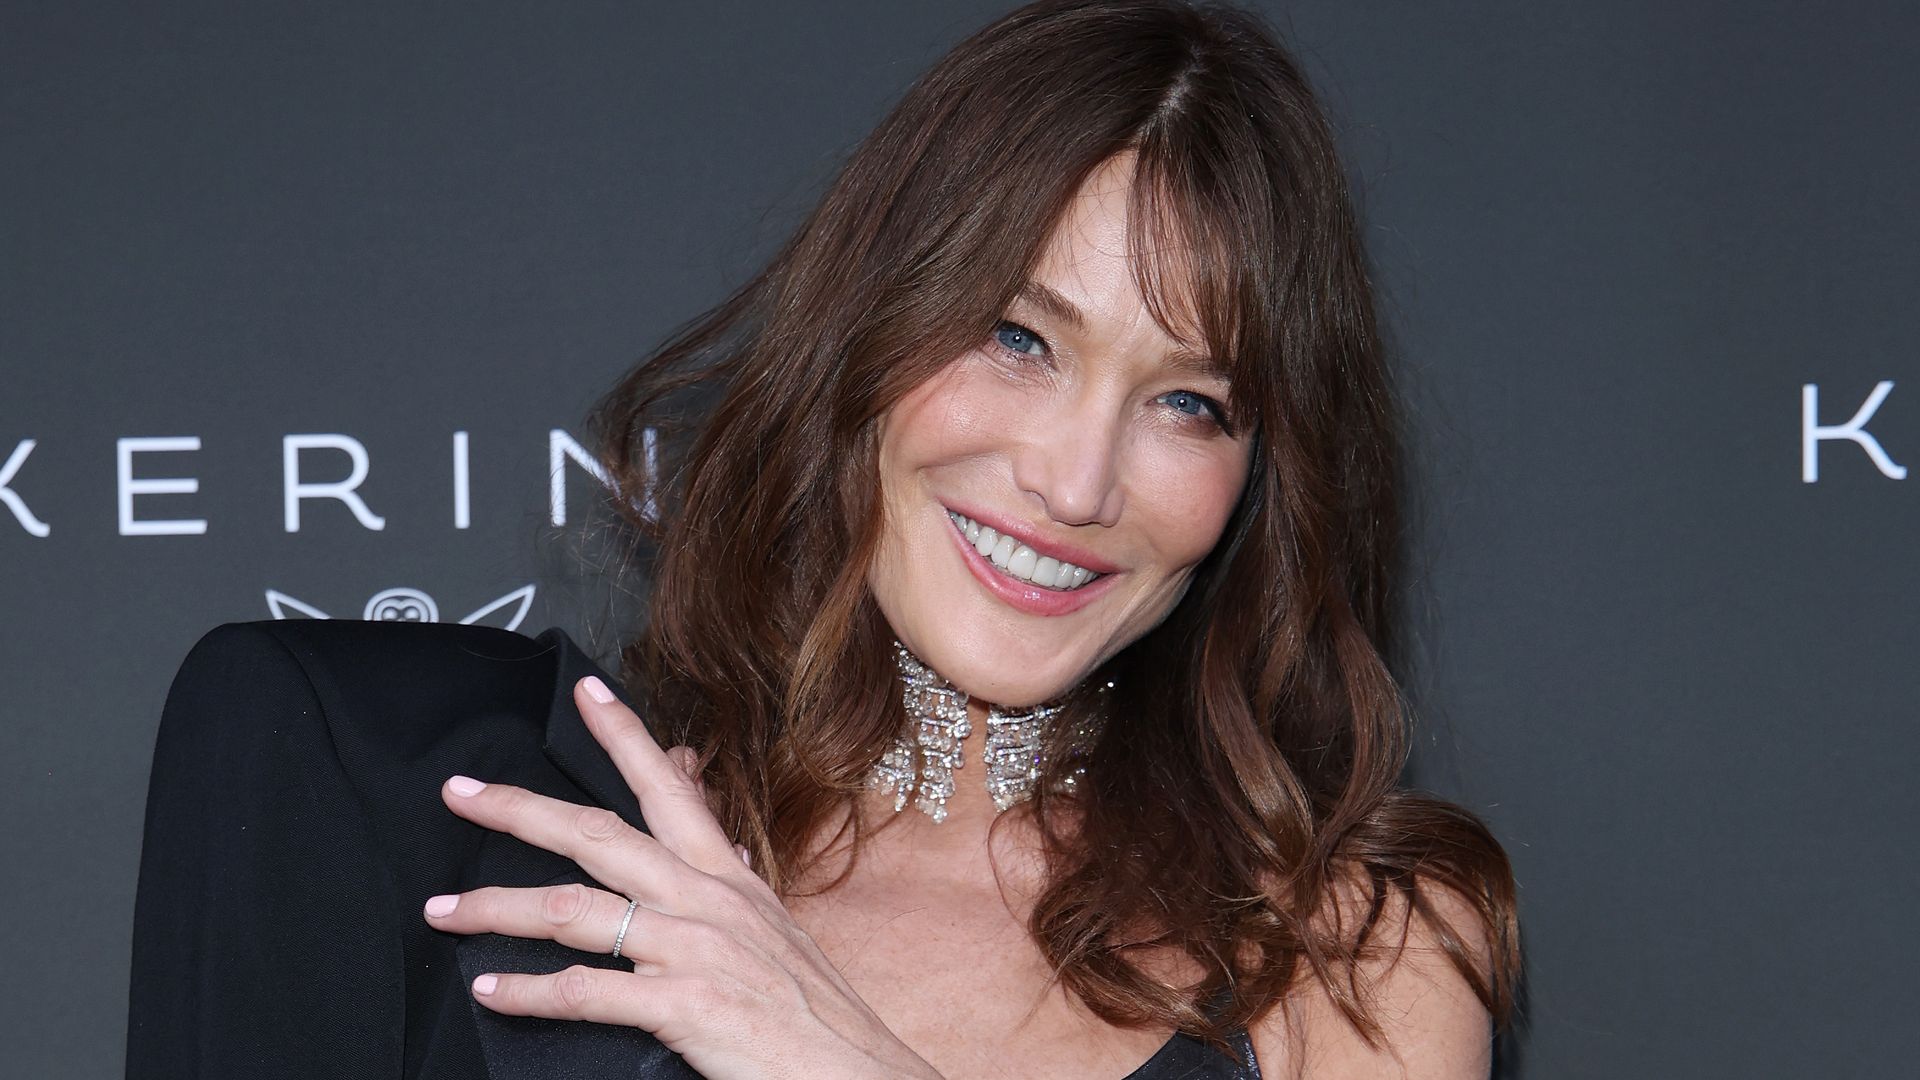 Carla Bruni posing for a photo in a black dress at a red carpet event